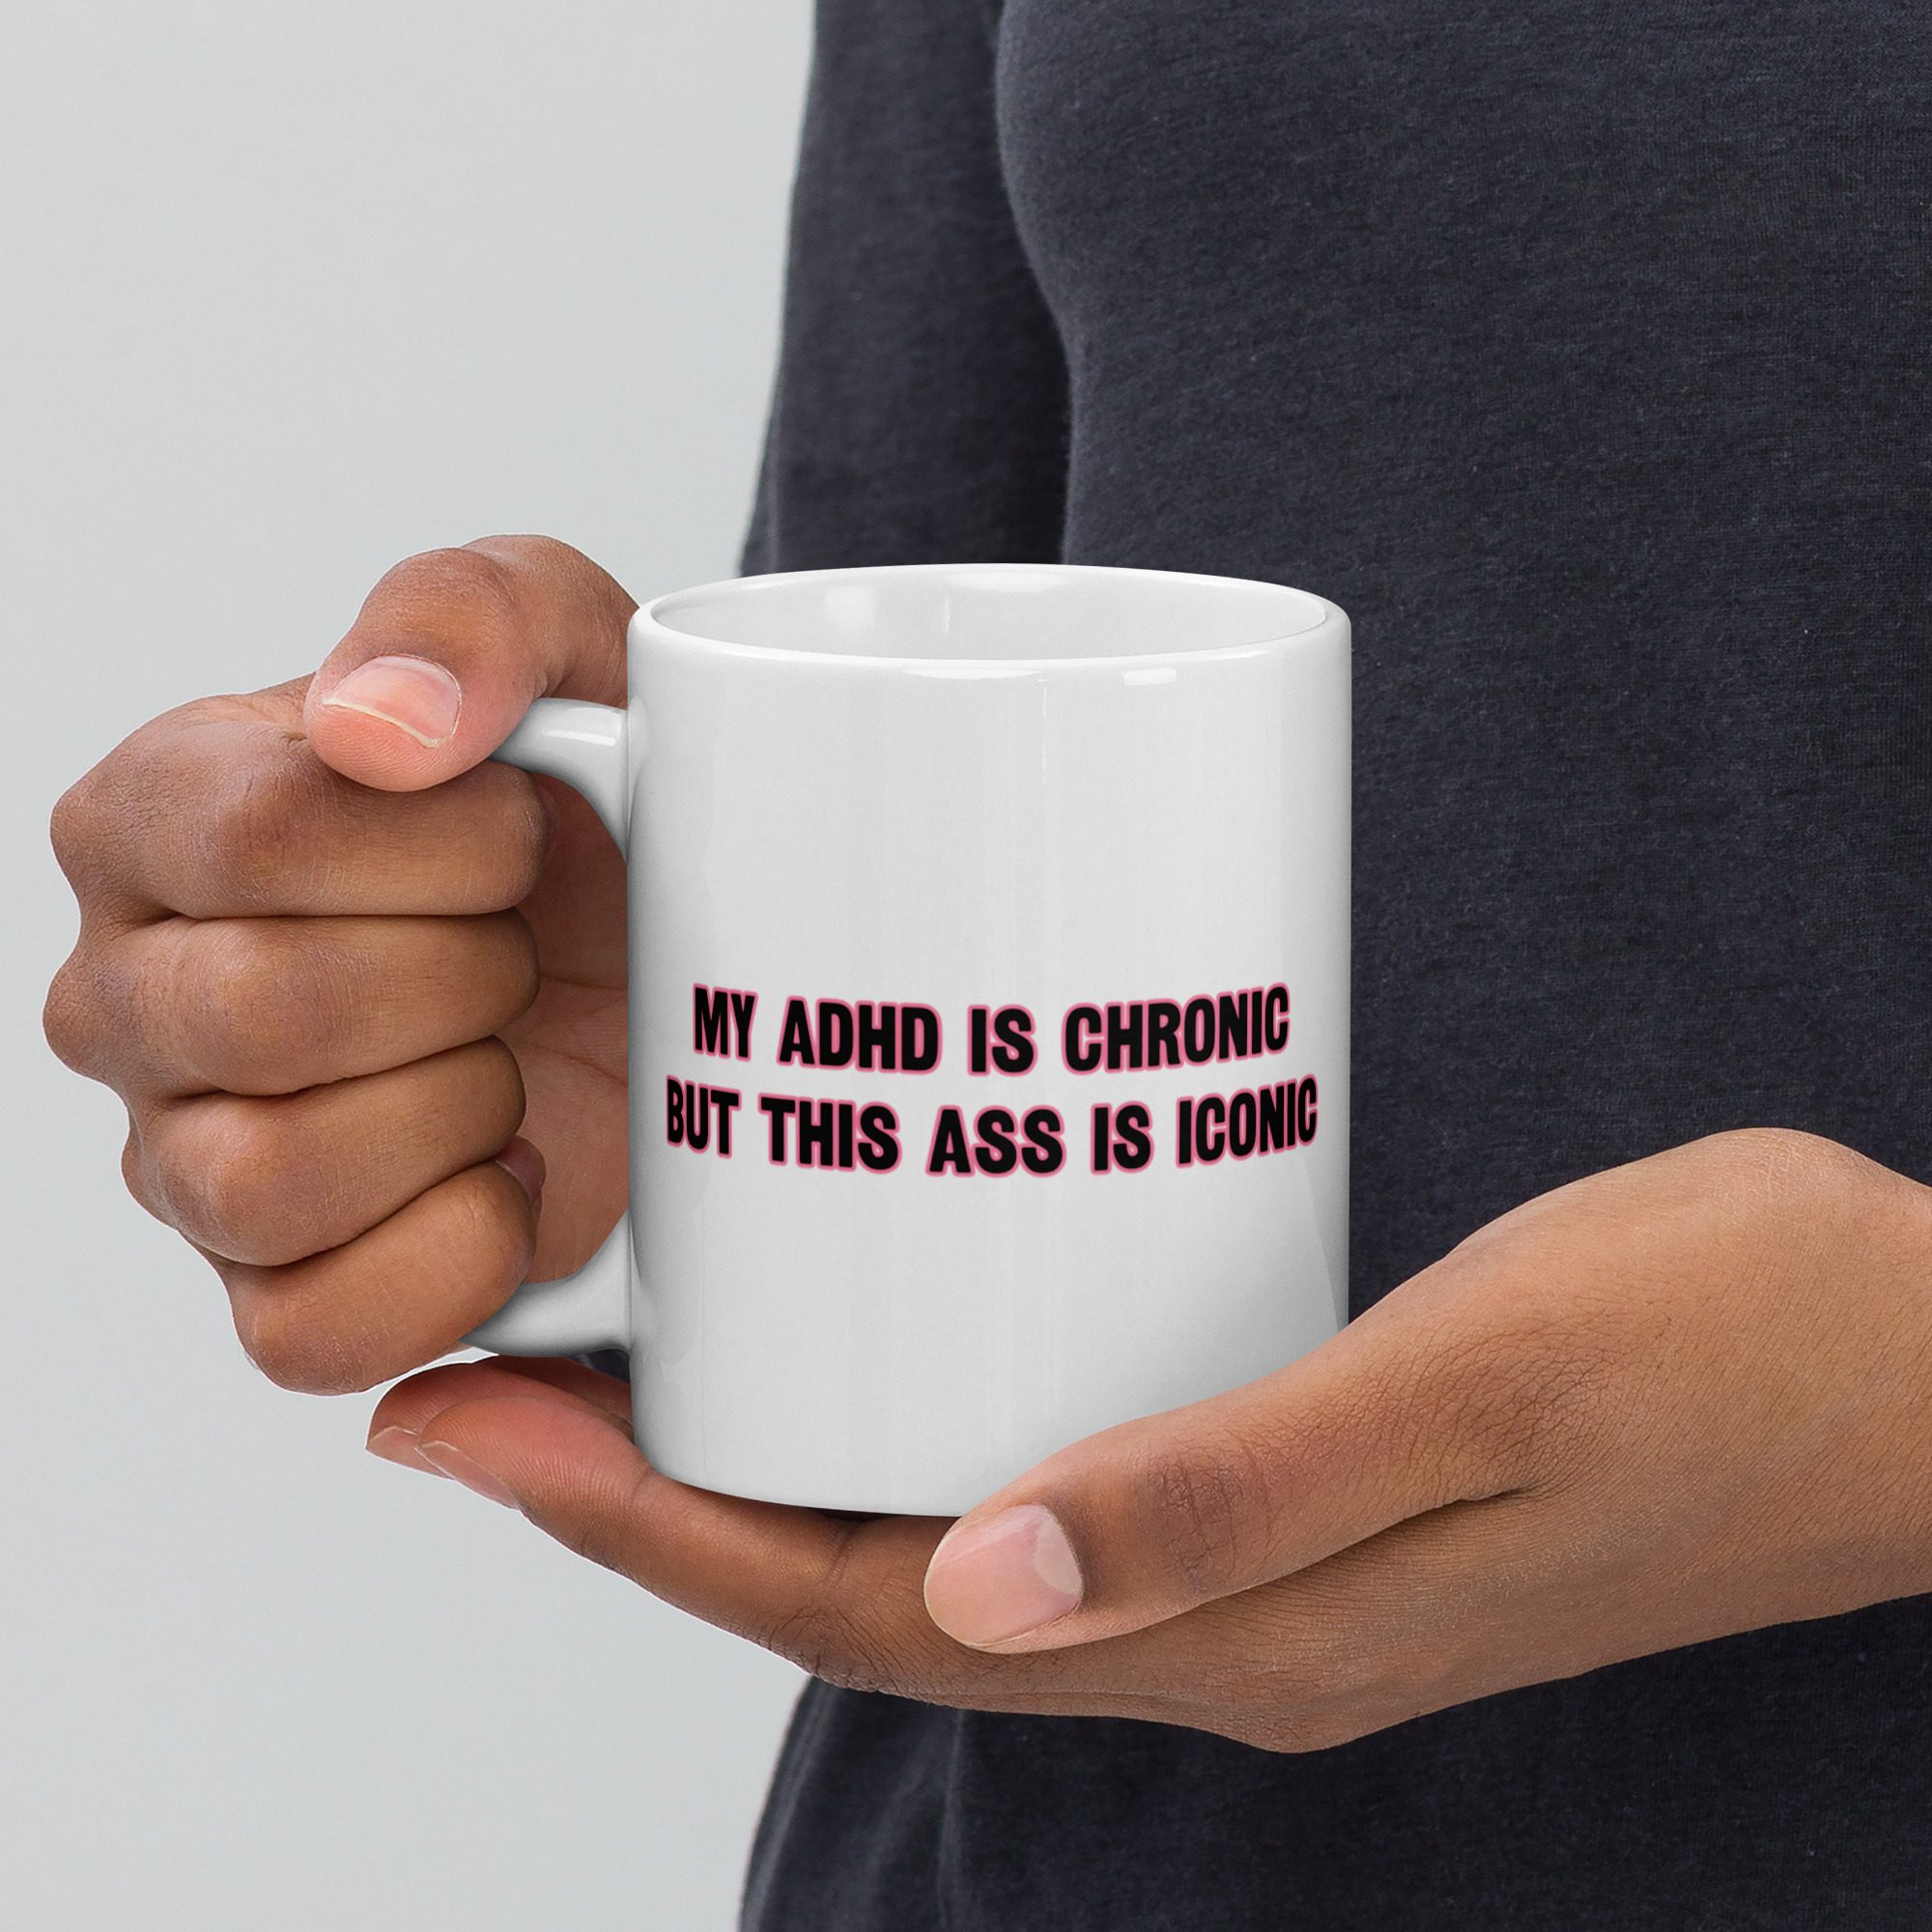 My ADHD Is Chronic But This Ass Is Iconic Mug